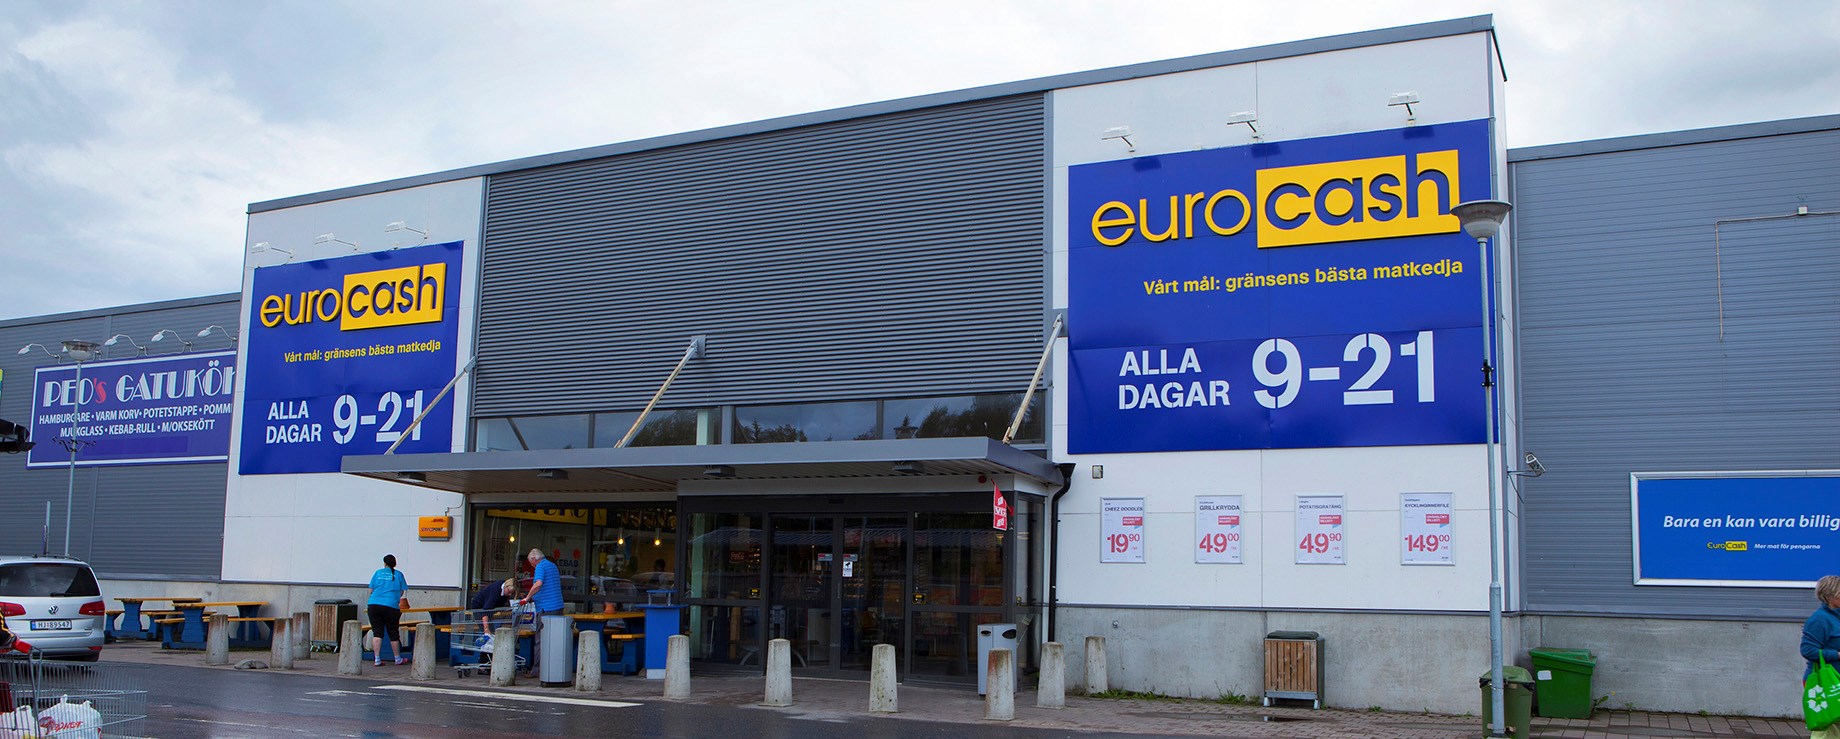 Eurocash, with its distinctive blue-yellow national colors, is owned by the largest private actor in Sweden, Axfood. 